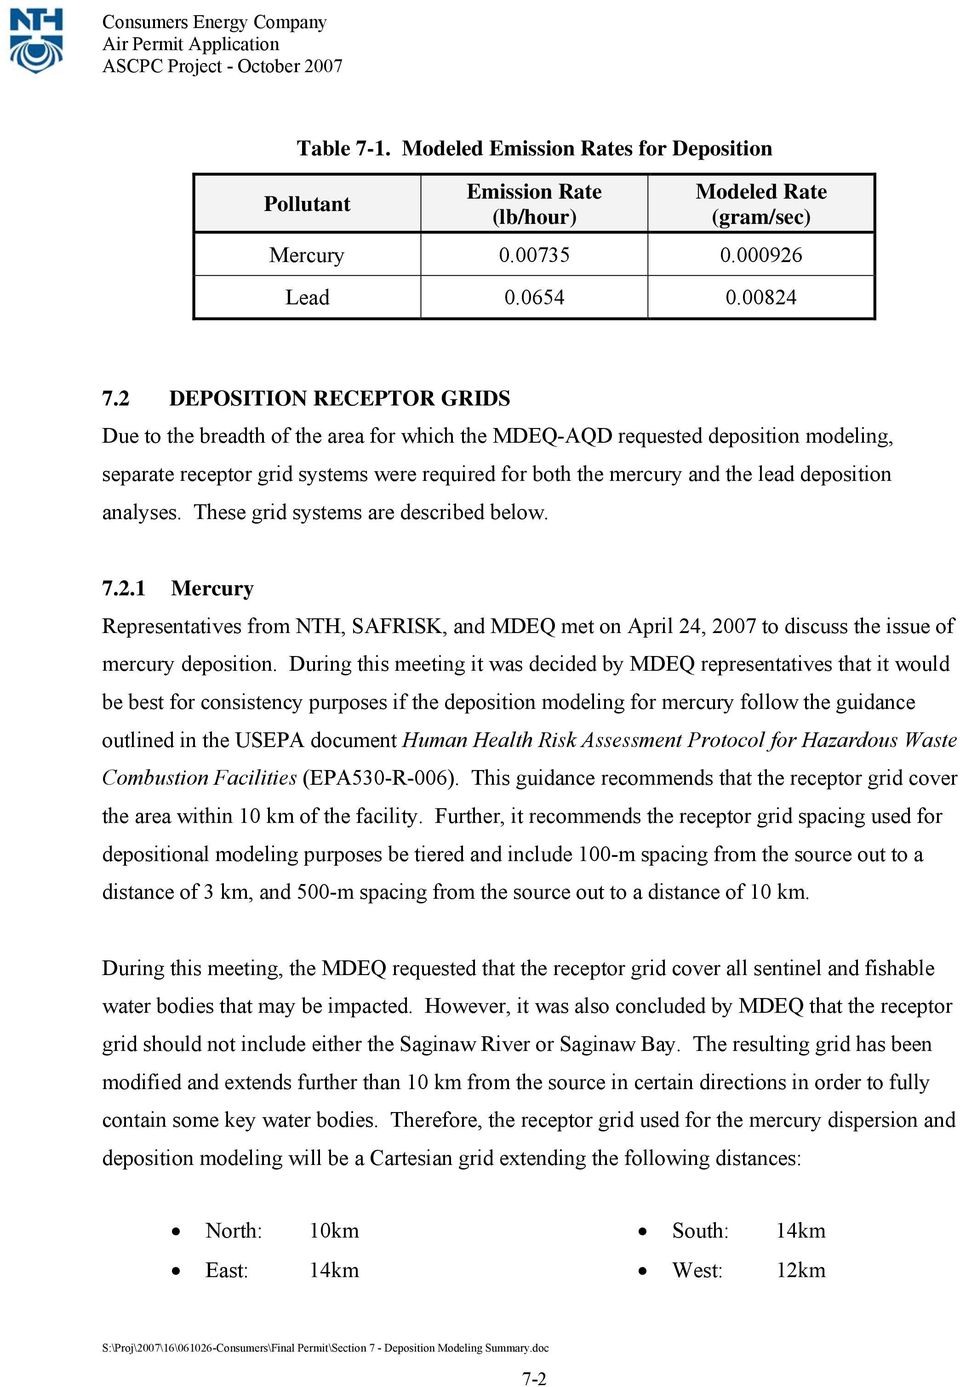 deposition analyses. These grid systems are described below. 7.2.1 Mercury Representatives from NTH, SAFRISK, and MDEQ met on April 24, 2007 to discuss the issue of mercury deposition.